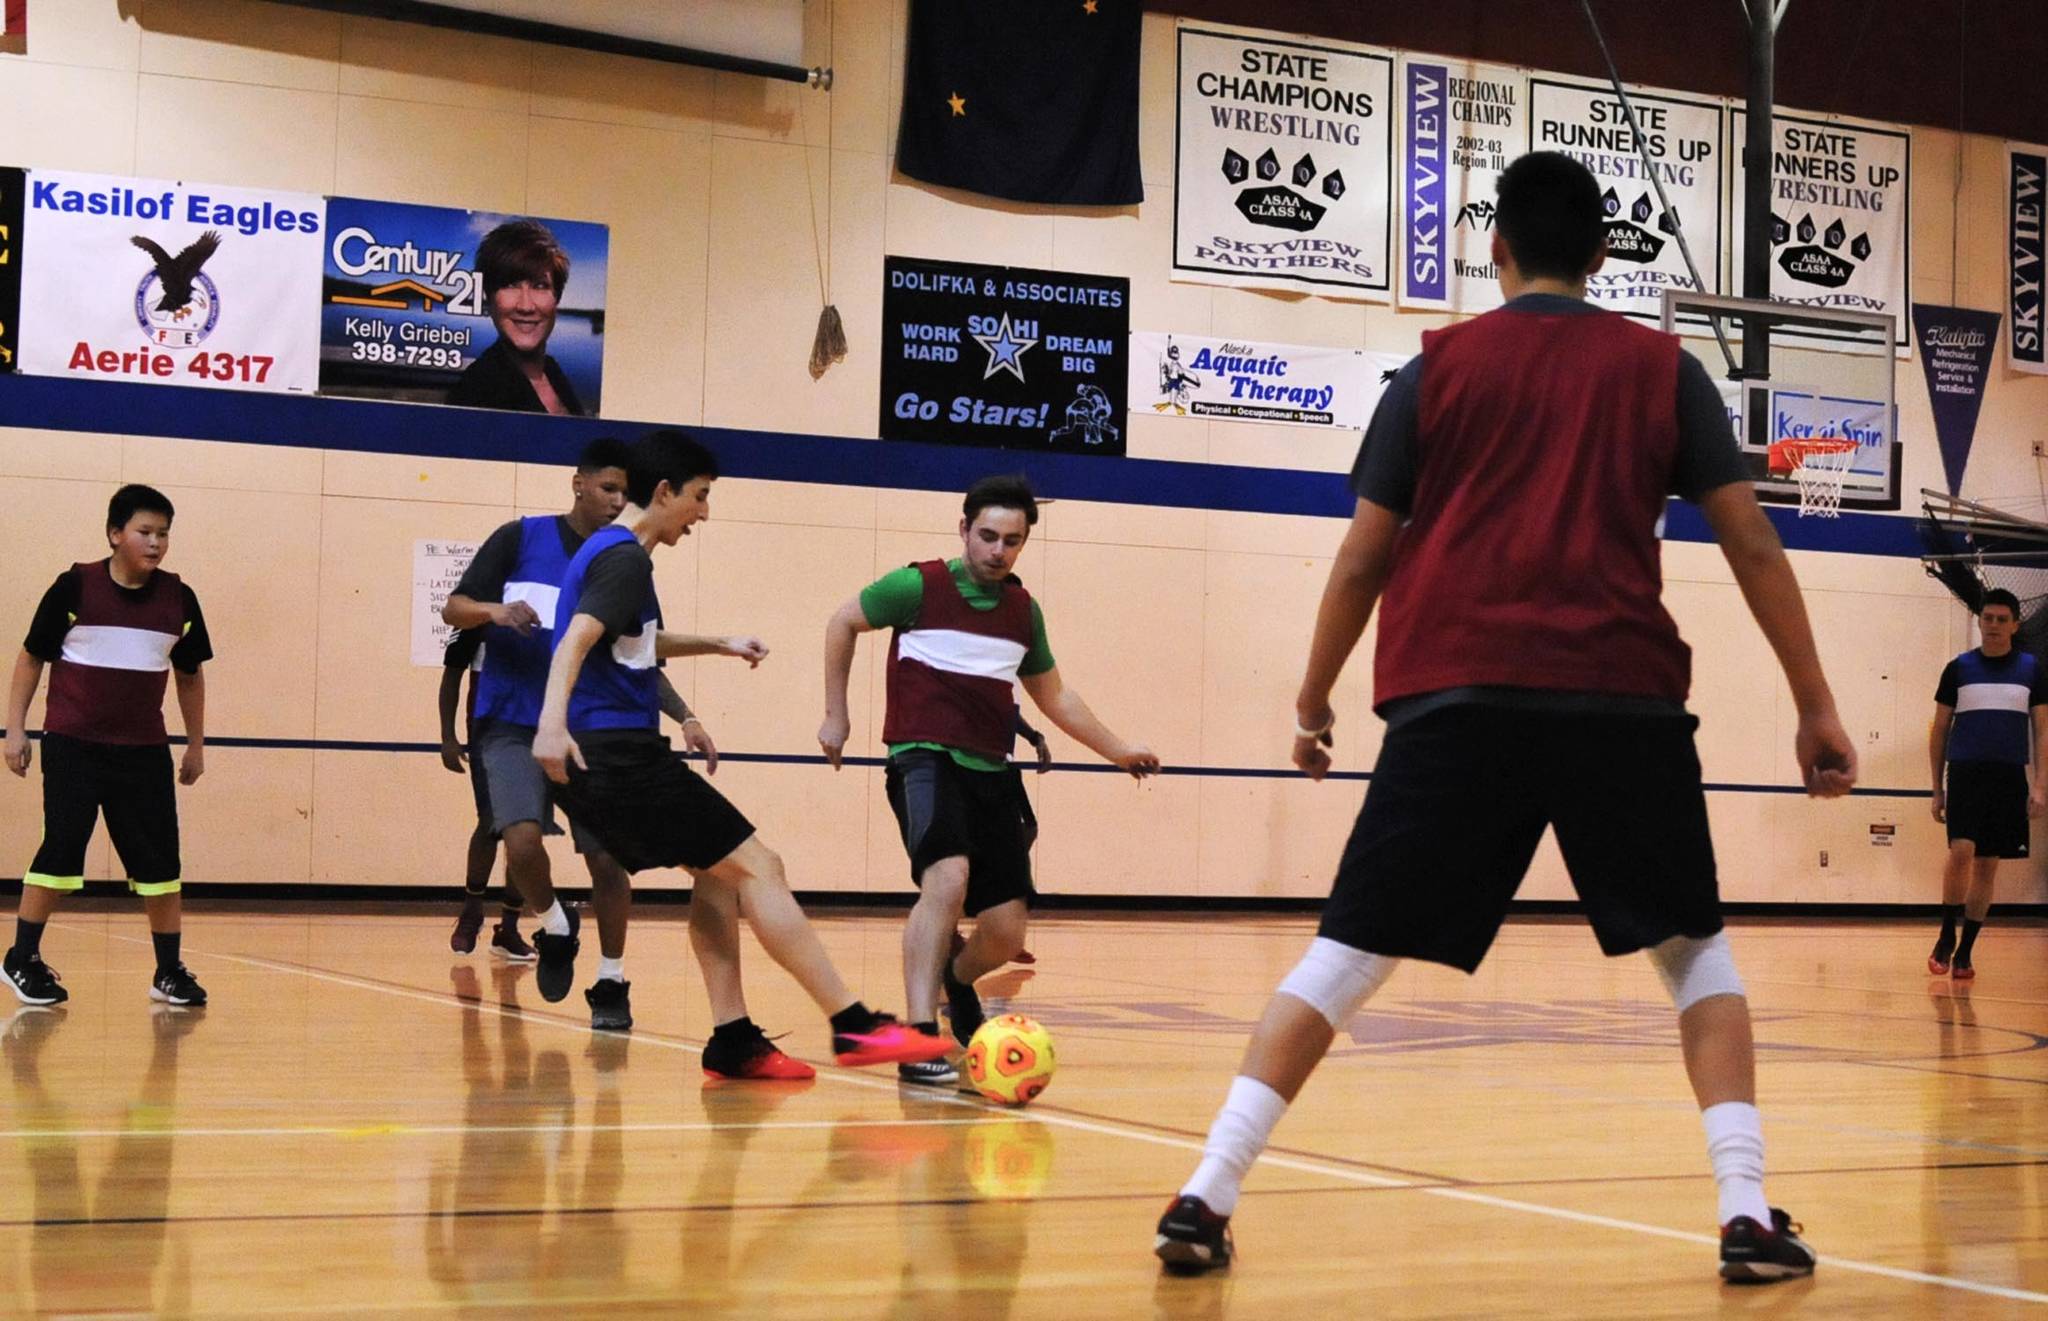 Soccer players vie for the ball during a game of futsal hosted by the Soldotna Community Schools program on Wednesday, Jan. 31, 2018 in Soldotna, Alaska. Futsal, a type of soccer, is a South American tradition in which players compete on a hard court rather than on turf for short games with five people on each team. Joel Todd, who coordinates the Community Schools program for the city of Soldotna, said the games on Wednesdays attract people of both genders and a variety of ages. Kids play from 6&